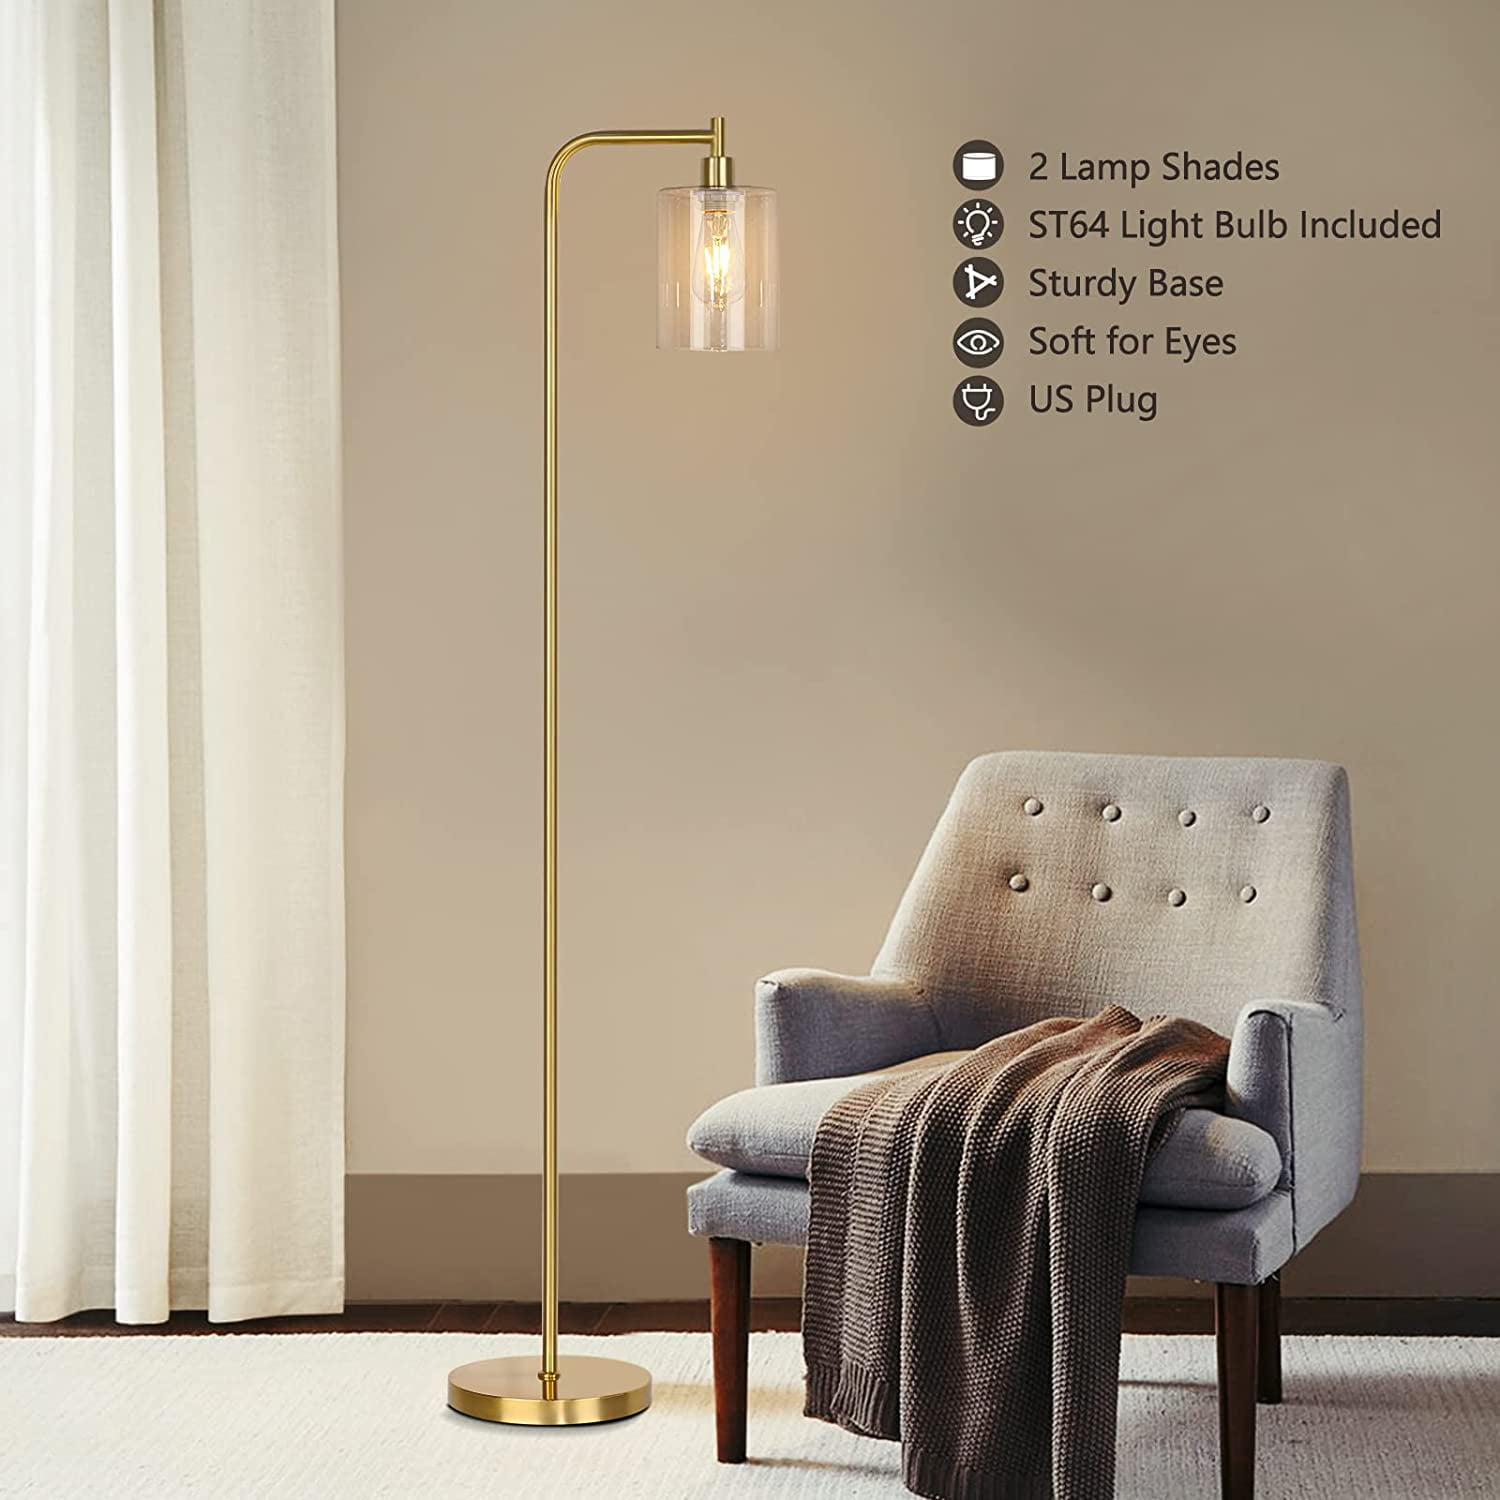 Simple Style Office Industrial Floor Lamp 6W LED Bulb Included Floor Lamp Bright LED Floor Lamp for Living Room and Bedroom Modern Floor Lamp with Foot Switch Standing Lamp with Glass Lampshade 